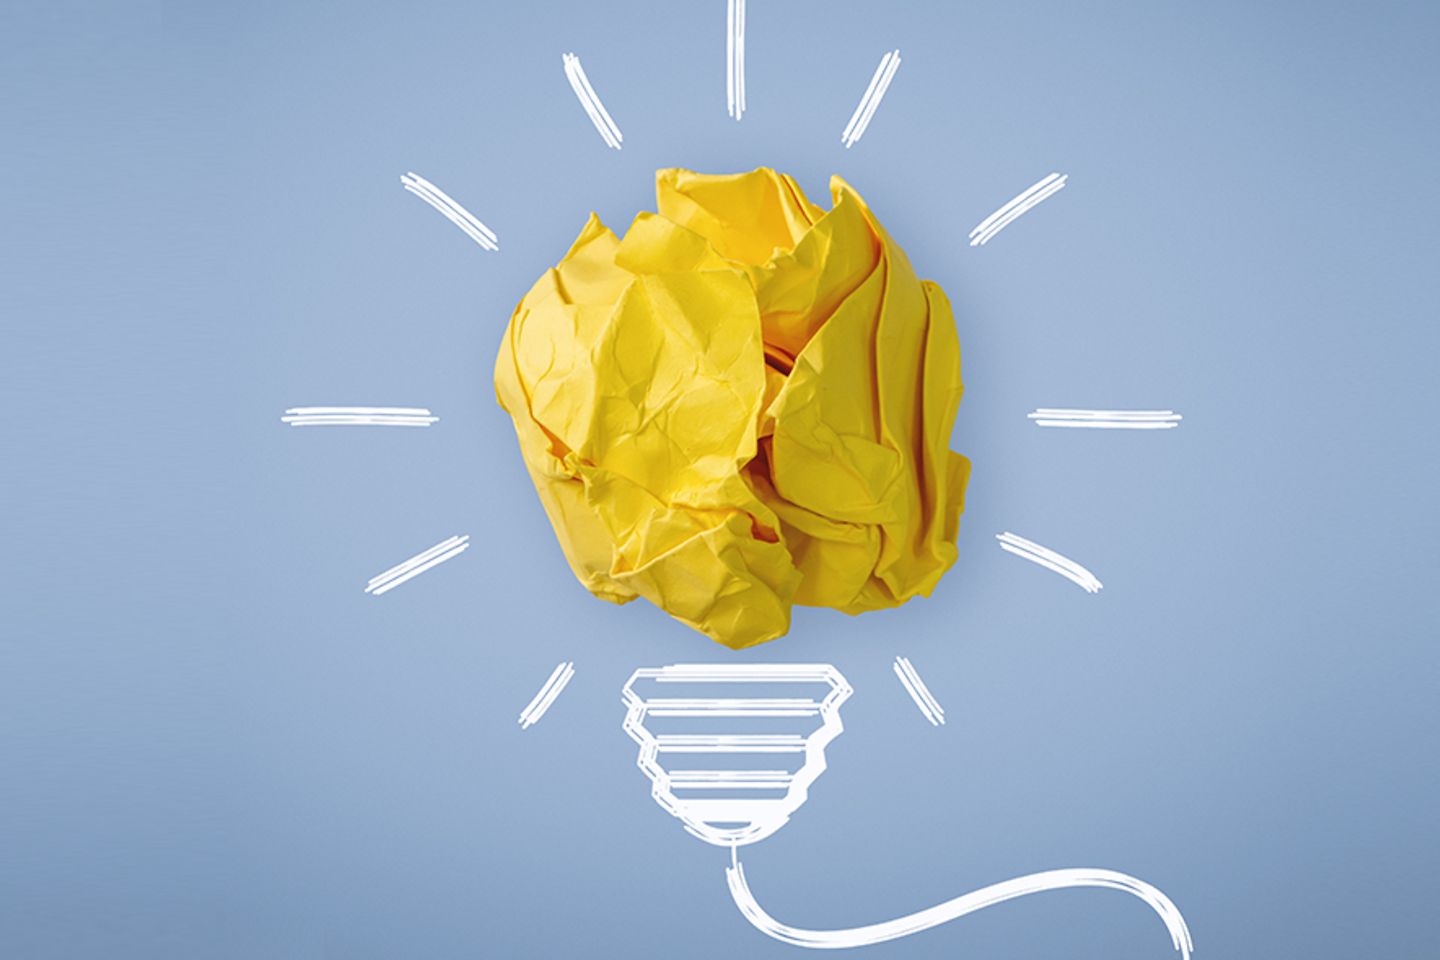 Illustration of a lightbulb made of white lines and a yellow ball of paper.